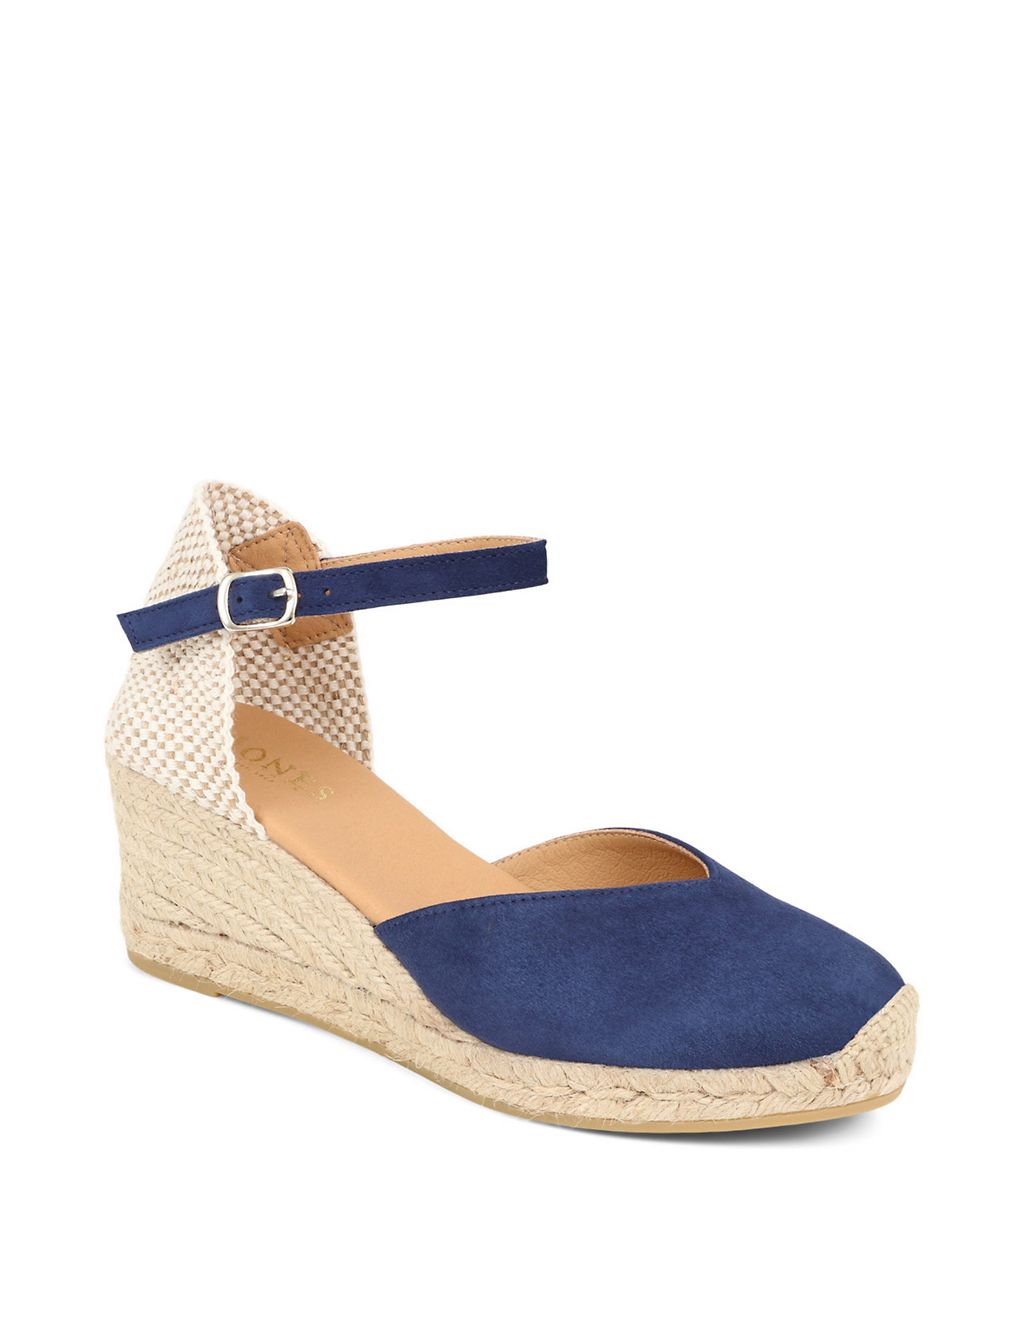 Suede Ankle Strap Wedge Espadrilles 8 of 8